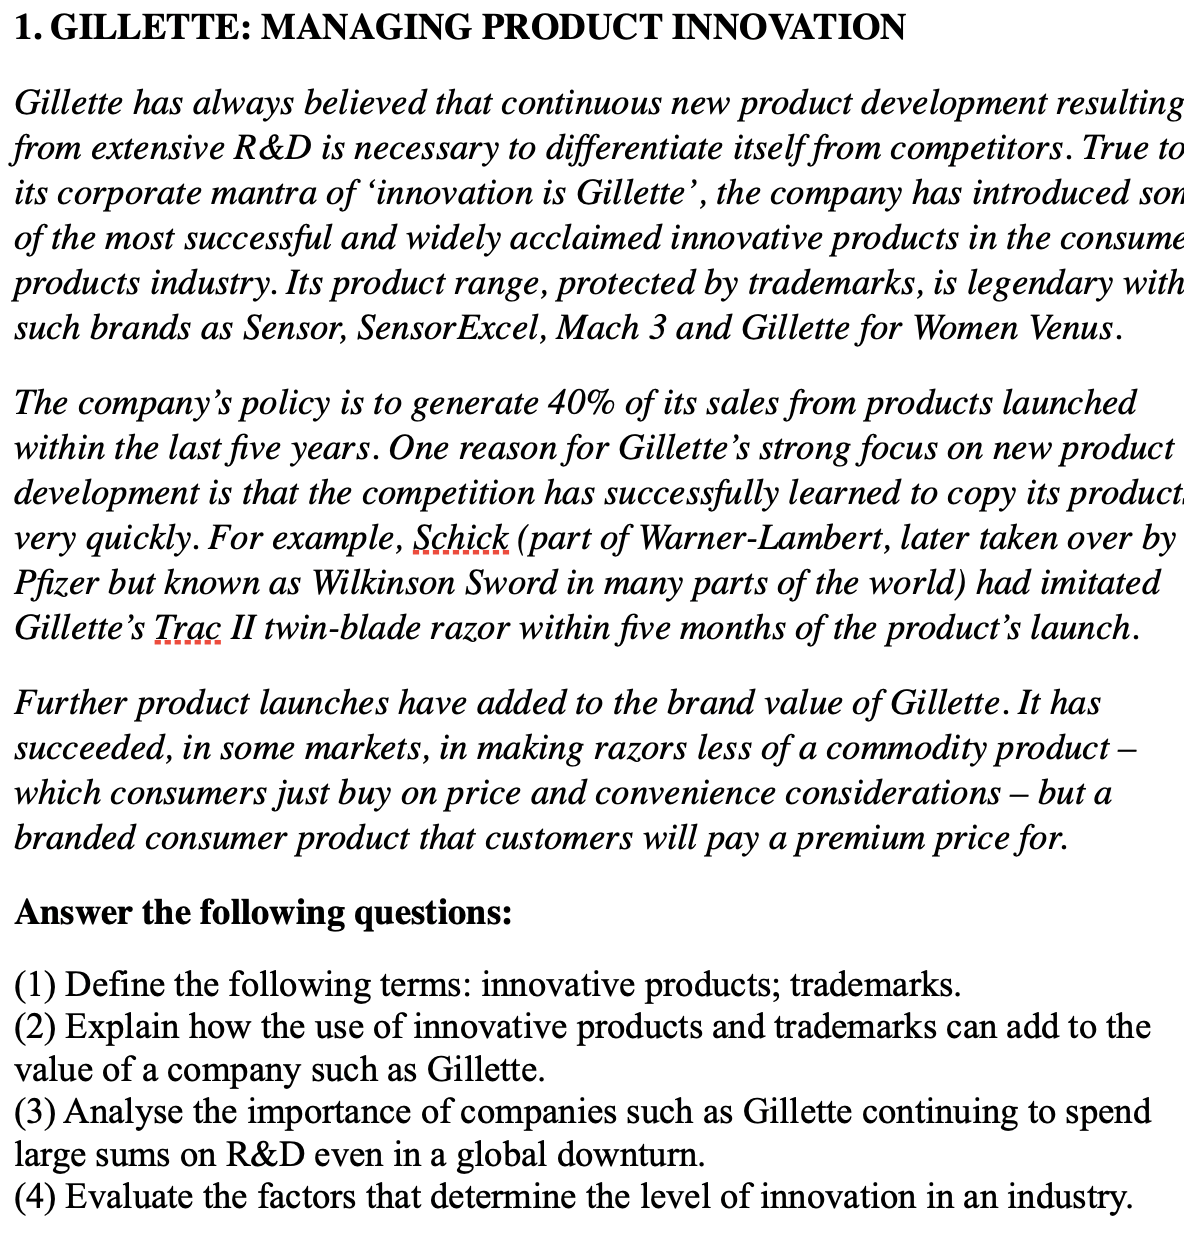 1. GILLETTE: MANAGING PRODUCT INNOVATION
Gillette has always believed that continuous new product development resulting
from extensive R&D is necessary to differentiate itself from competitors. True to
its corporate mantra of 'innovation is Gillette', the company has introduced son
of the most successful and widely acclaimed innovative products in the consume
products industry. Its product range, protected by trademarks, is legendary with
such brands as Sensor, Sensor Excel, Mach 3 and Gillette for Women Venus.
The company's policy is to generate 40% of its sales from products launched
within the last five years. One reason for Gillette's strong focus on new product
development is that the competition has successfully learned to copy its product
very quickly. For example, Schick (part of Warner-Lambert, later taken over by
Pfizer but known as Wilkinson Sword in many parts of the world) had imitated
Gillette's Trac II twin-blade razor within five months of the product's launch.
Further product launches have added to the brand value of Gillette. It has
succeeded, in some markets, in making razors less of a commodity product -
which consumers just buy on price and convenience considerations – but a
branded consumer product that customers will pay a premium price for.
Answer the following questions:
(1) Define the following terms: innovative products; trademarks.
(2) Explain how the use of innovative products and trademarks can add to the
value of a company such as Gillette.
(3) Analyse the importance of companies such as Gillette continuing to spend
large sums on R&D even in a global downturn.
(4) Evaluate the factors that determine the level of innovation in an industry.